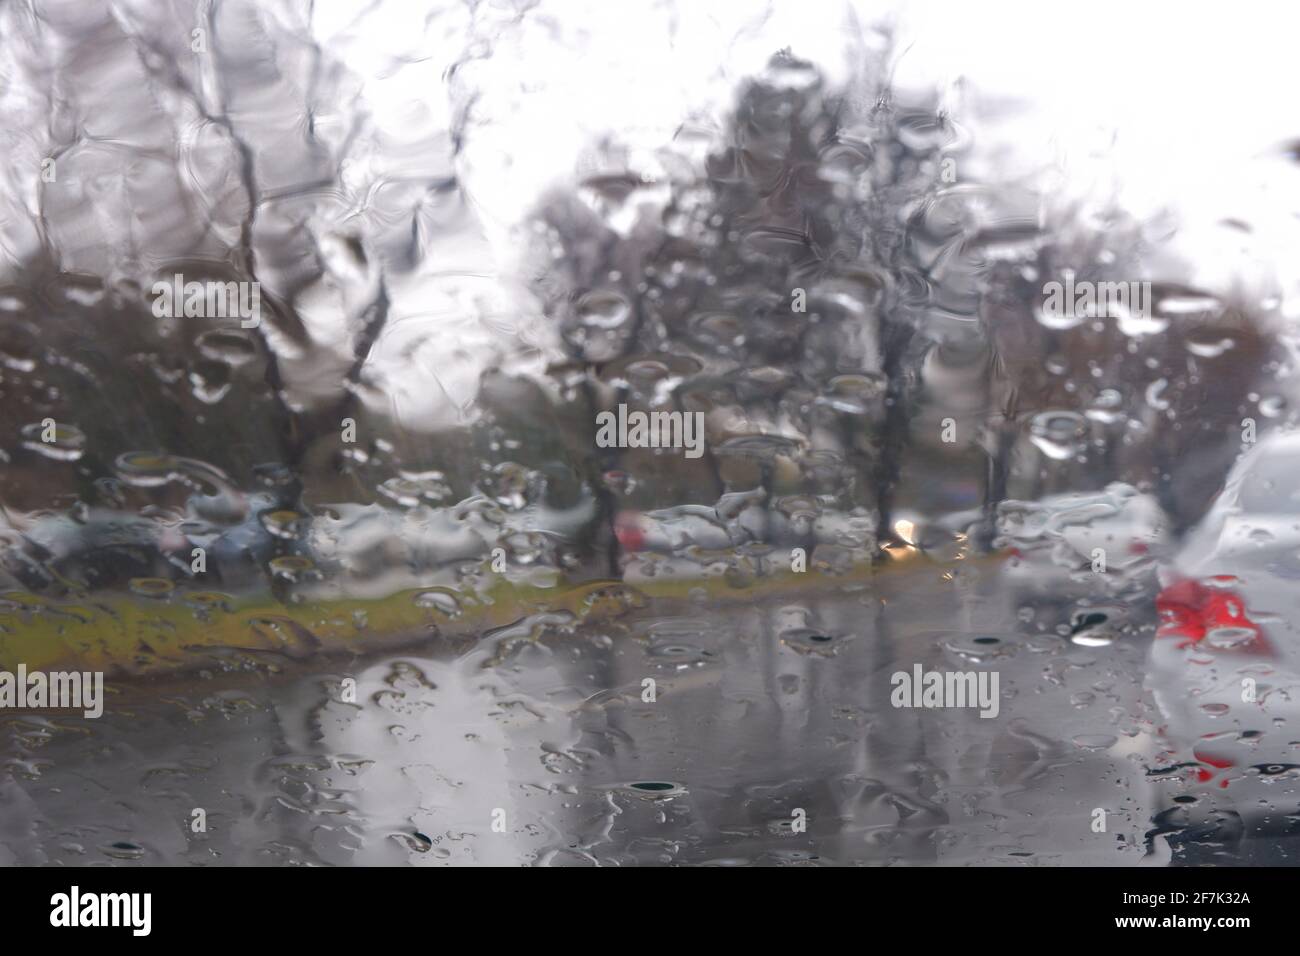 Water Drops on Window at a Rainy Day, Wet Roads Stock Photo